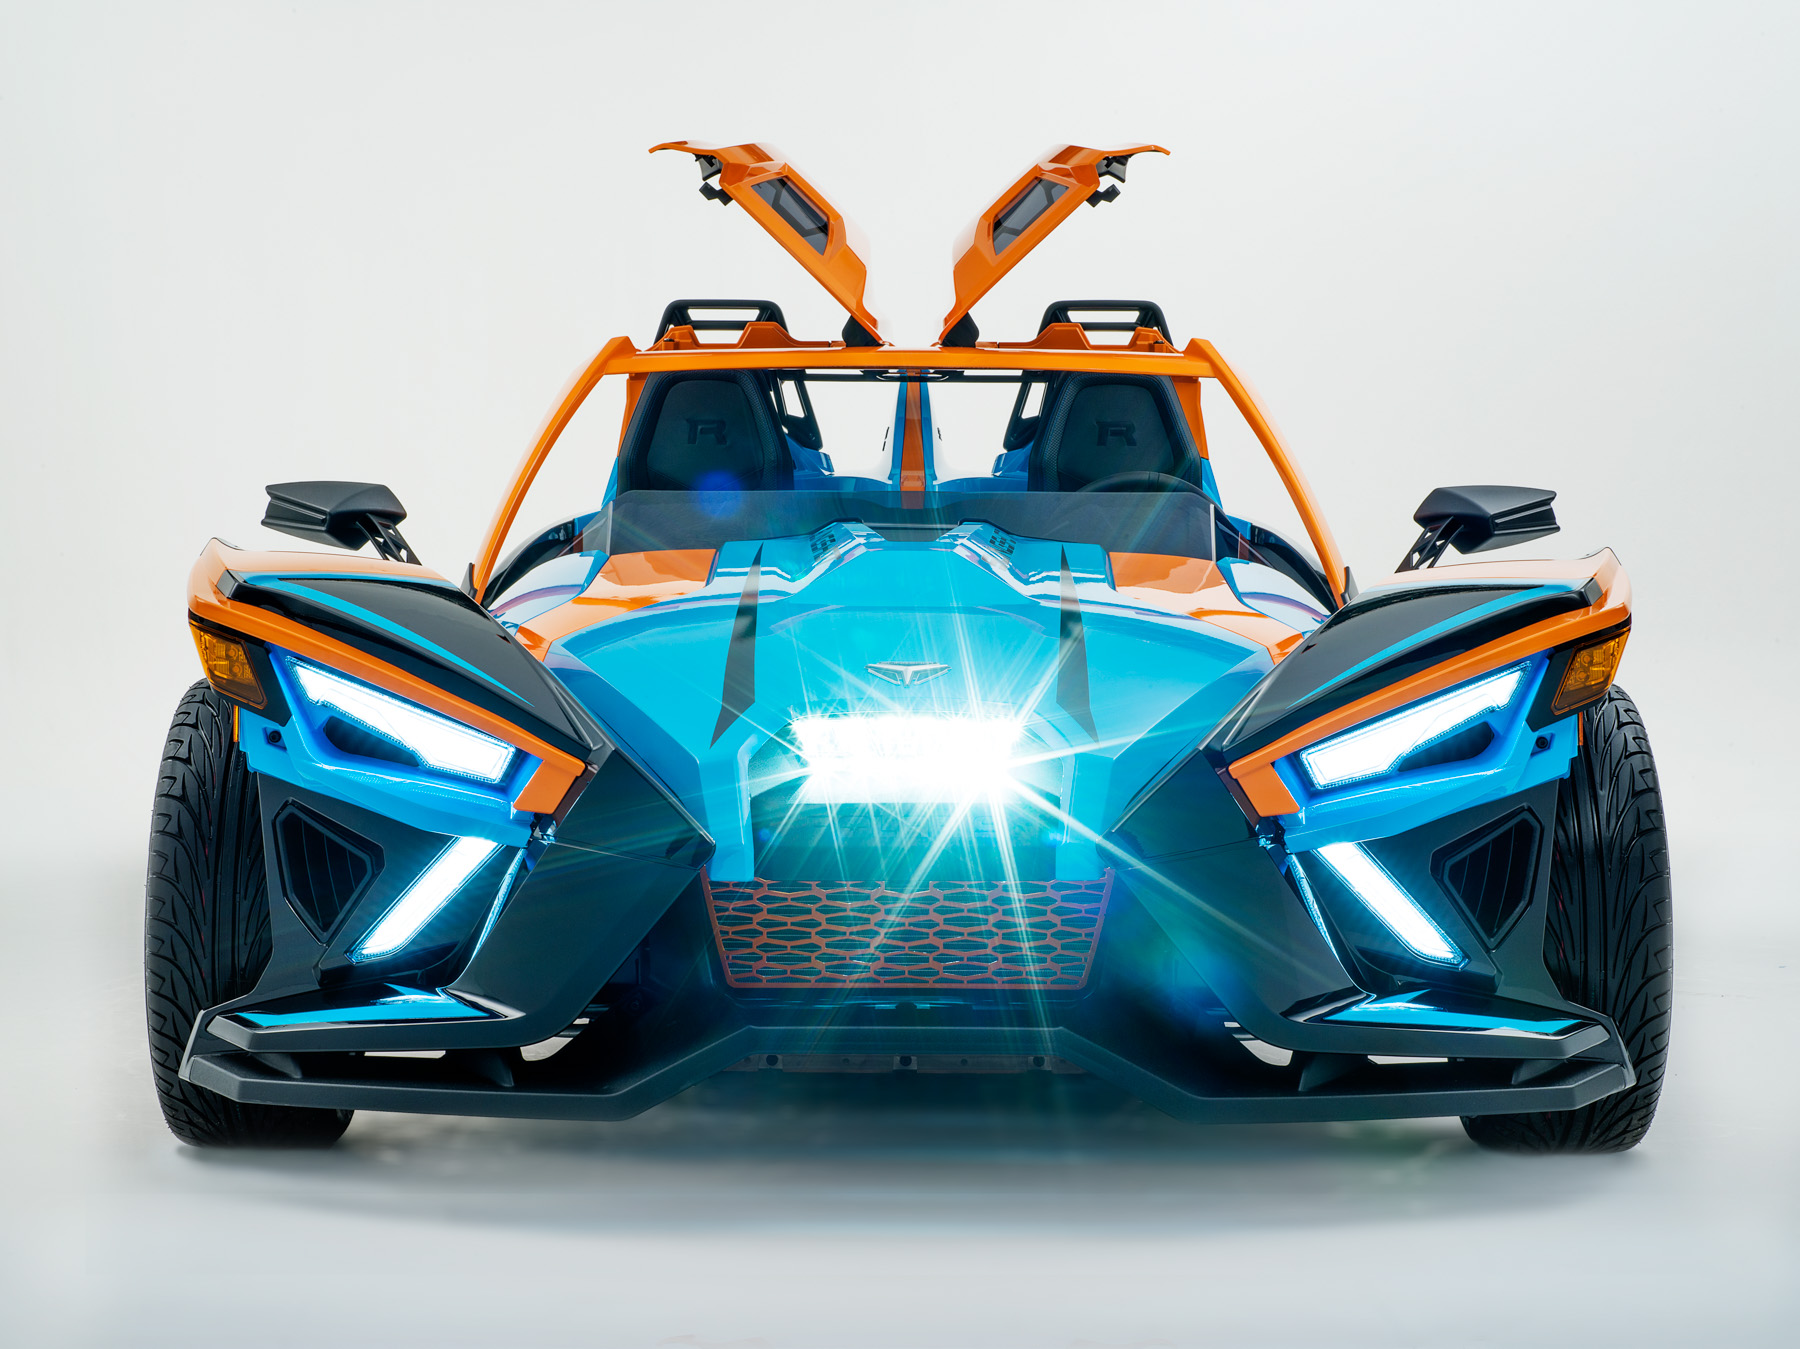 Polaris Slingshot by Boston based commercial lifestyle and portrait photographer Brian Nevins